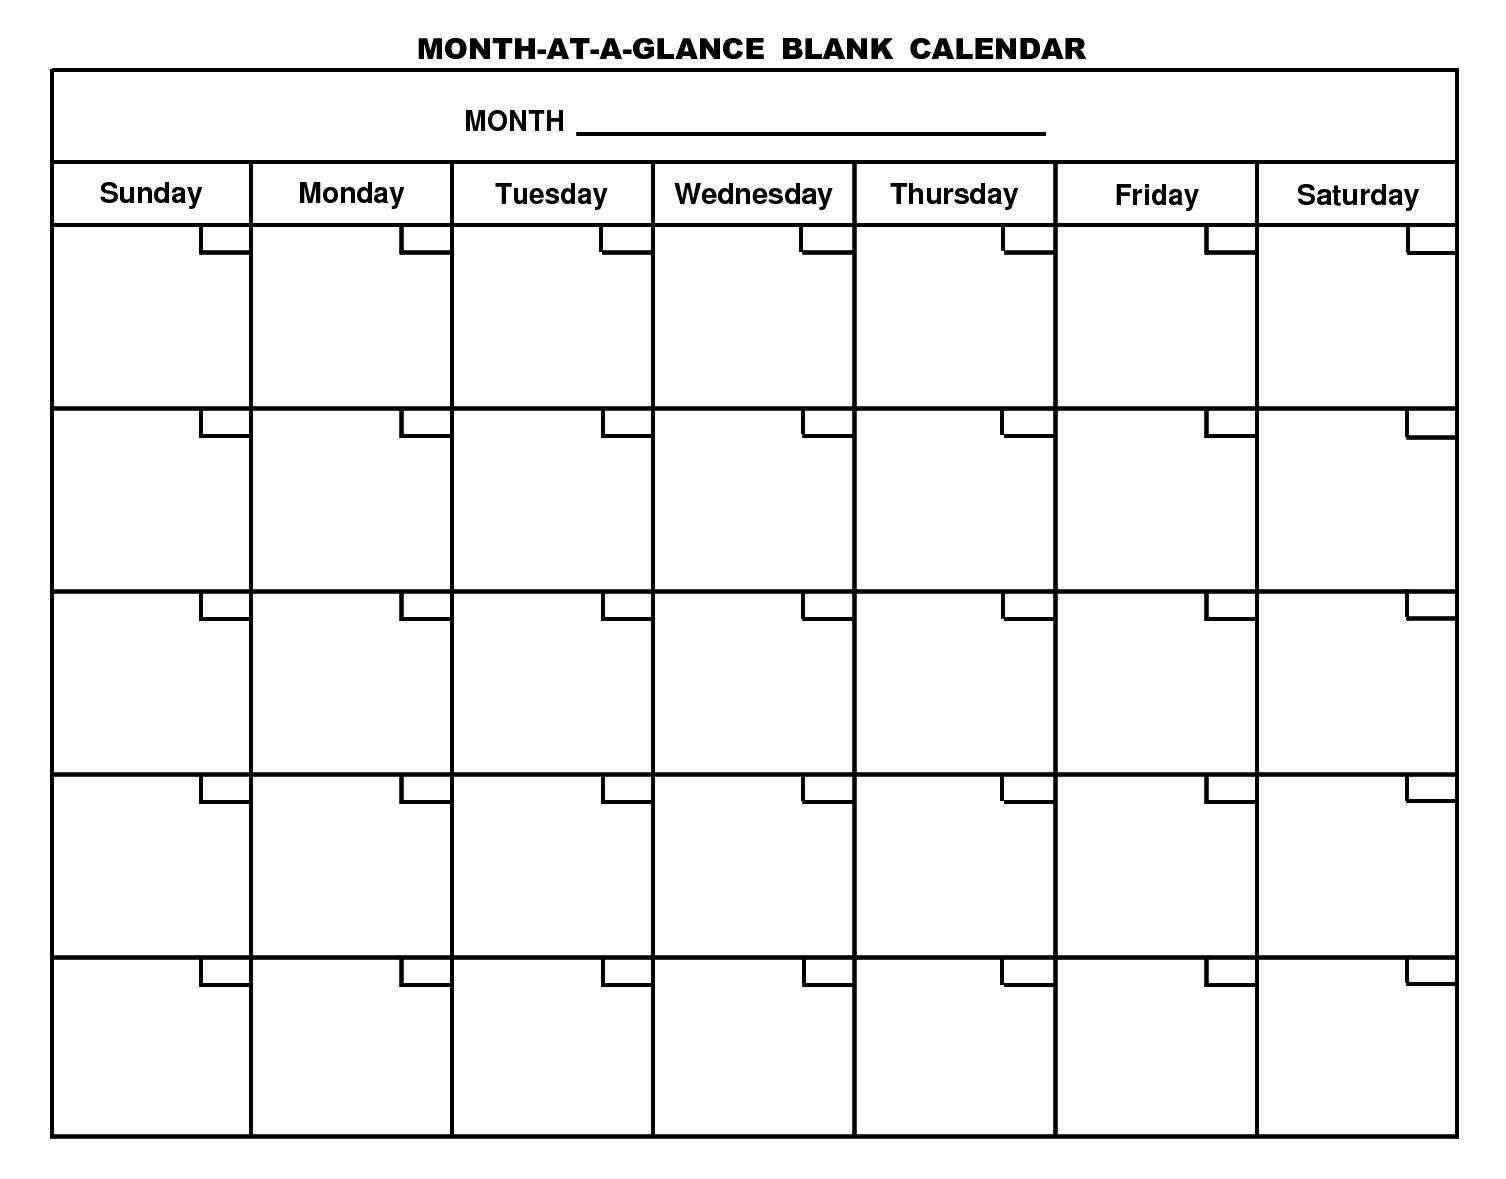 Month At A Glance Blank Calendar Template - Dalep.midnightpig.co With Month At A Glance Blank Calendar Template